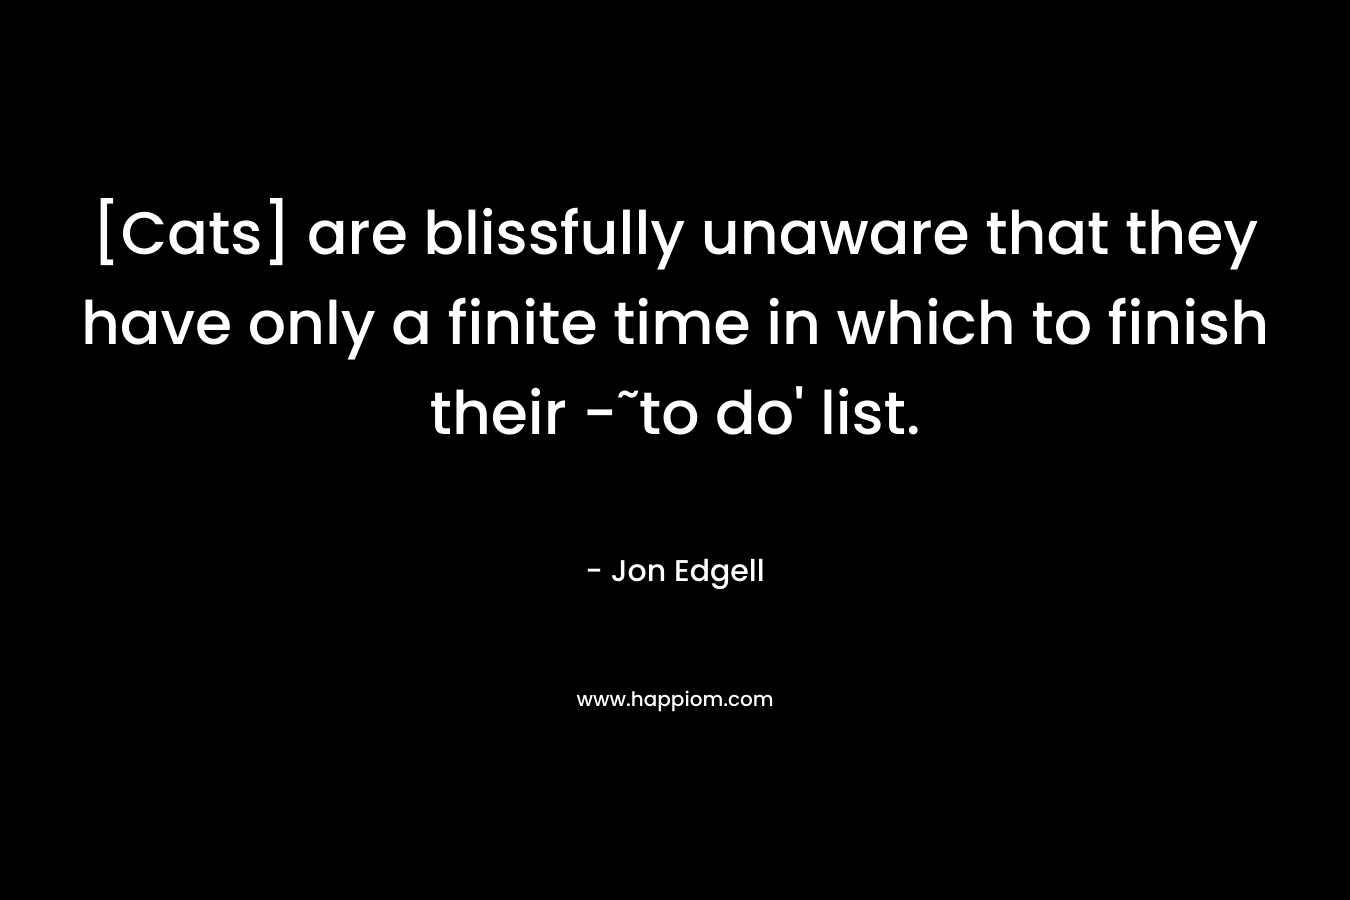 [Cats] are blissfully unaware that they have only a finite time in which to finish their -˜to do’ list. – Jon Edgell